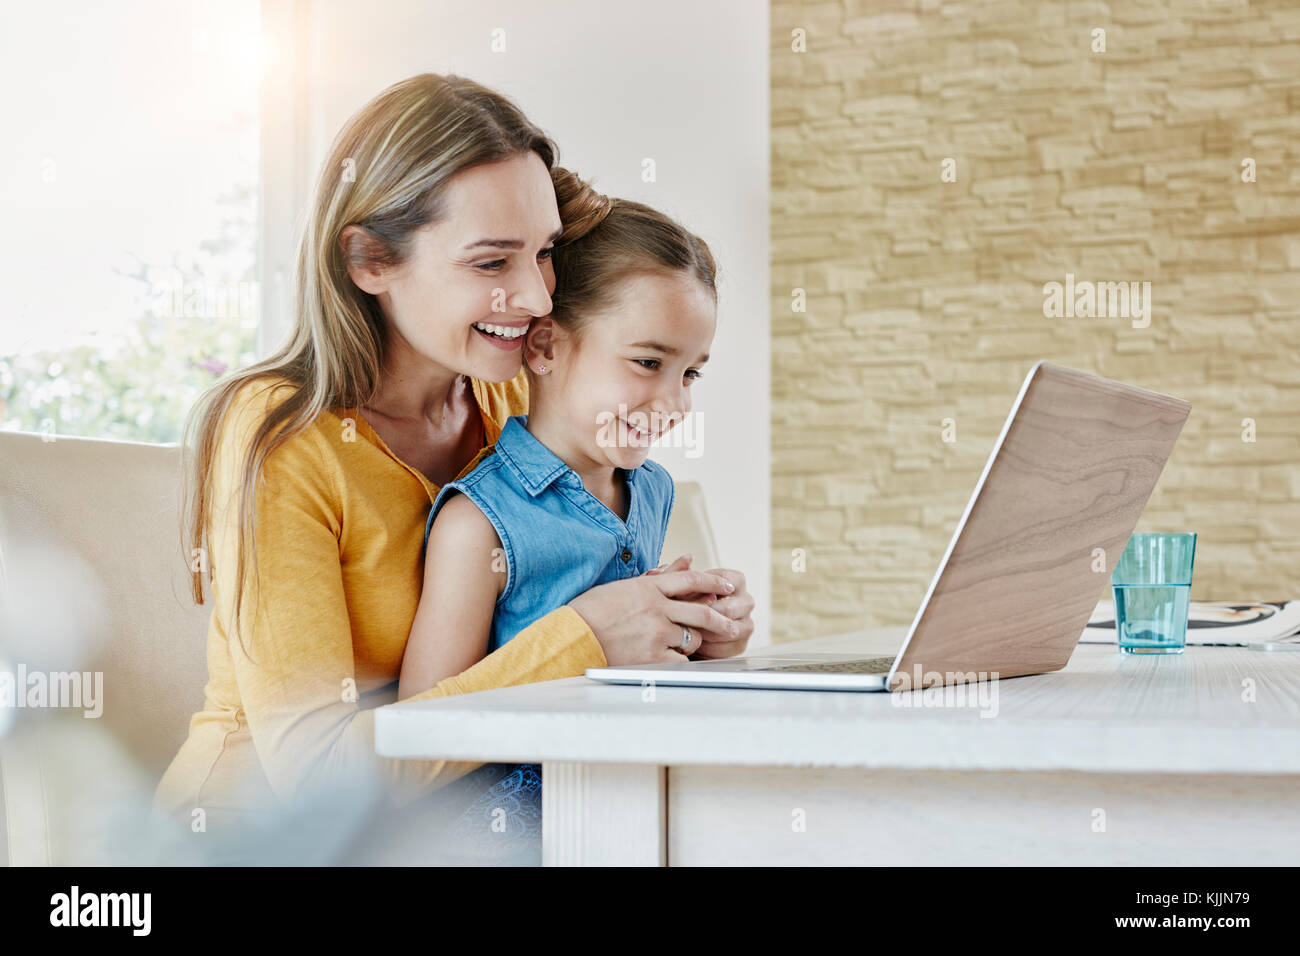 Happy mother with daughter at home looking at laptop Banque D'Images